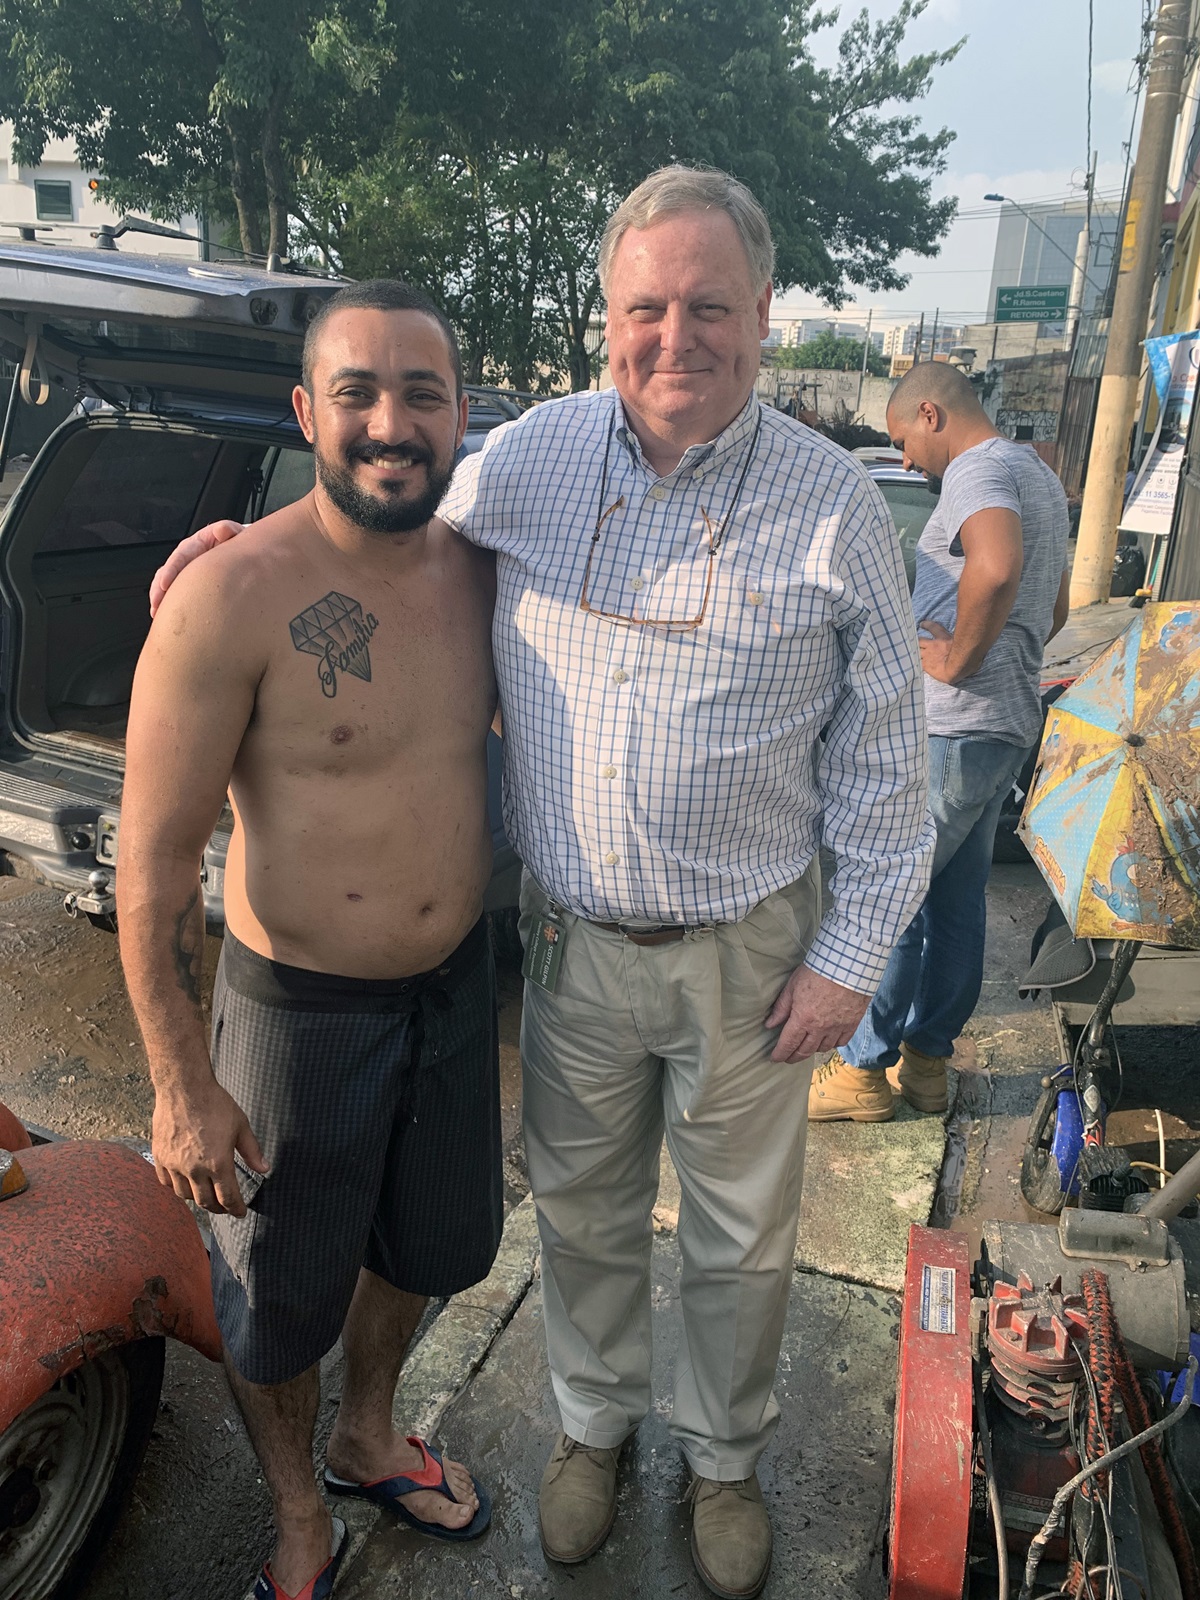 Victor Pastel (left) and Scott Gilpin after Gilpin sought shelter in Pastel’s home during March 10-11 flooding and landslides in Brazil. Photo courtesy of Scott Gilpin.